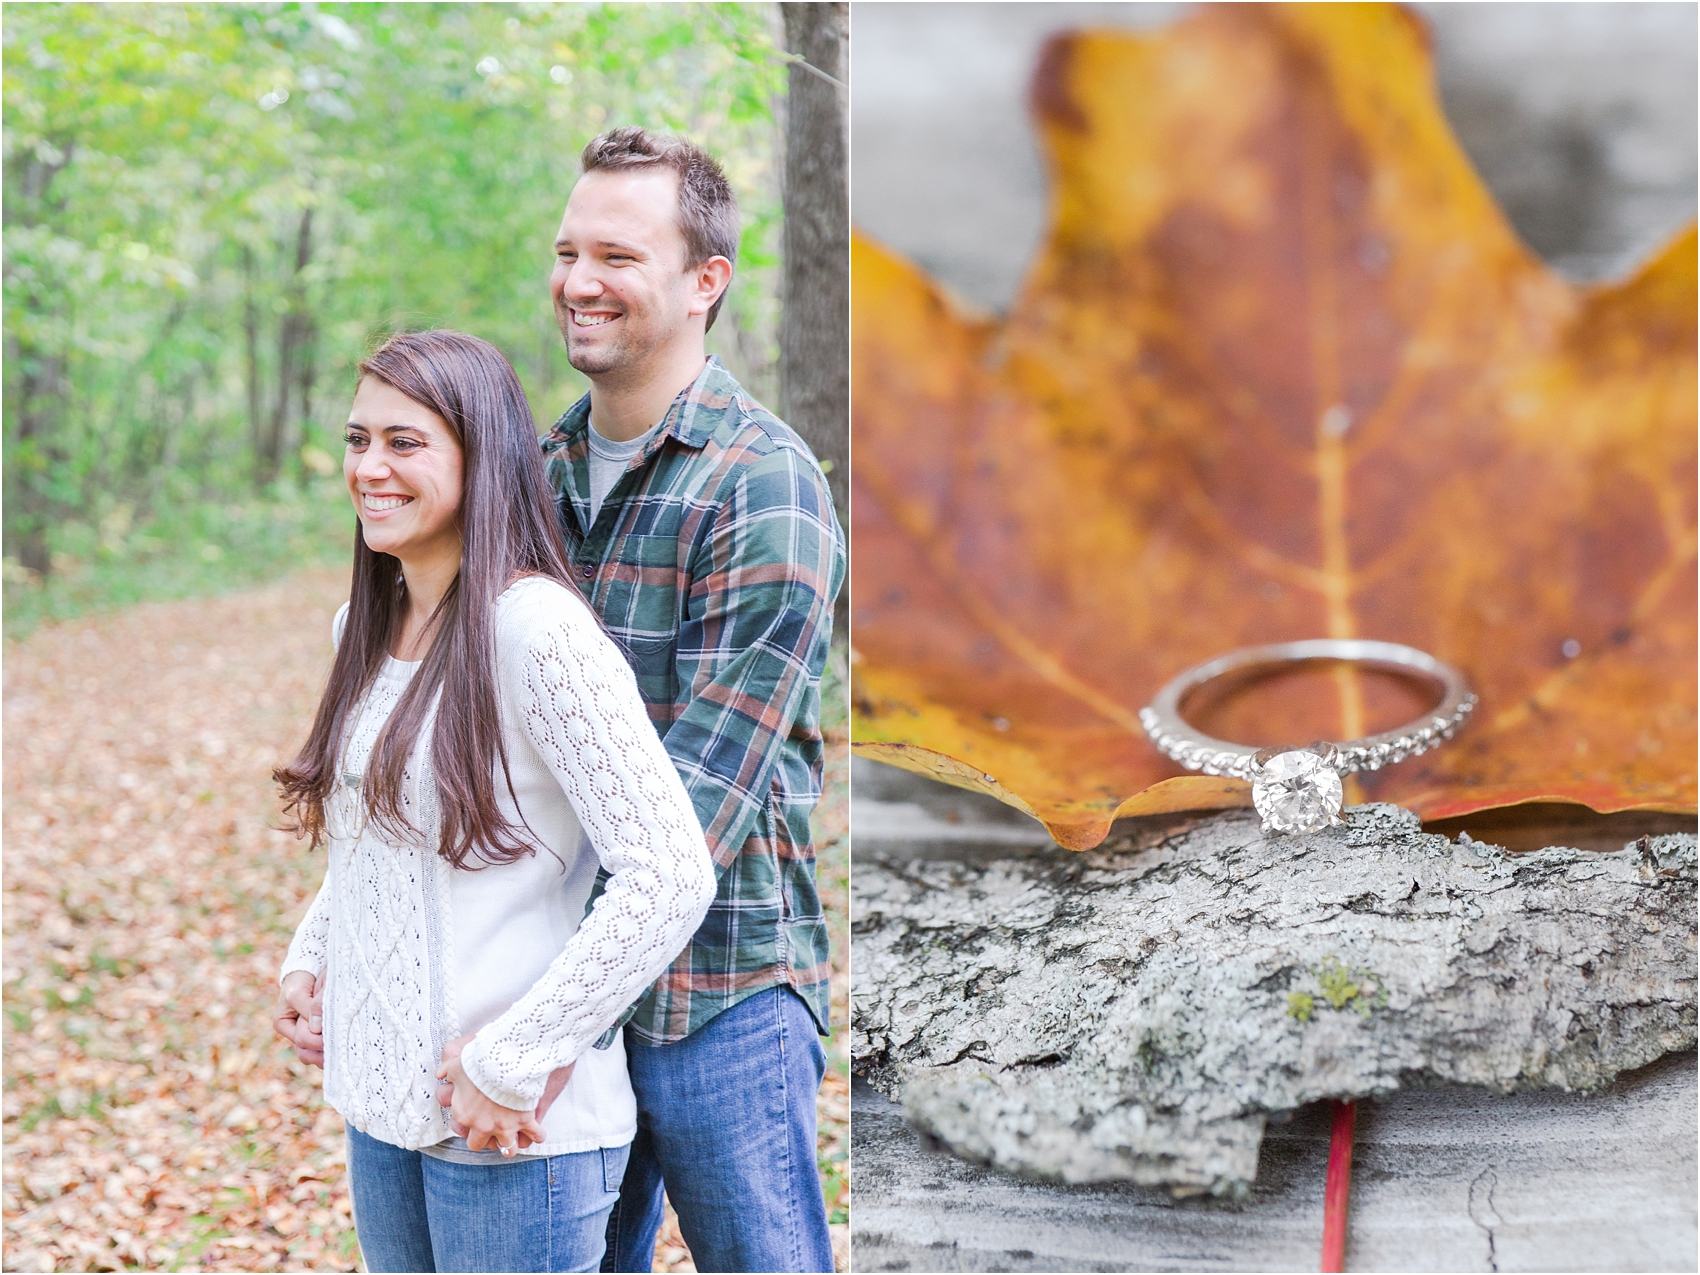 relaxed-autumn-engagement-photos-at-hudson-mills-metropark-in-dexter-mi-by-courtney-carolyn-photography_0013.jpg